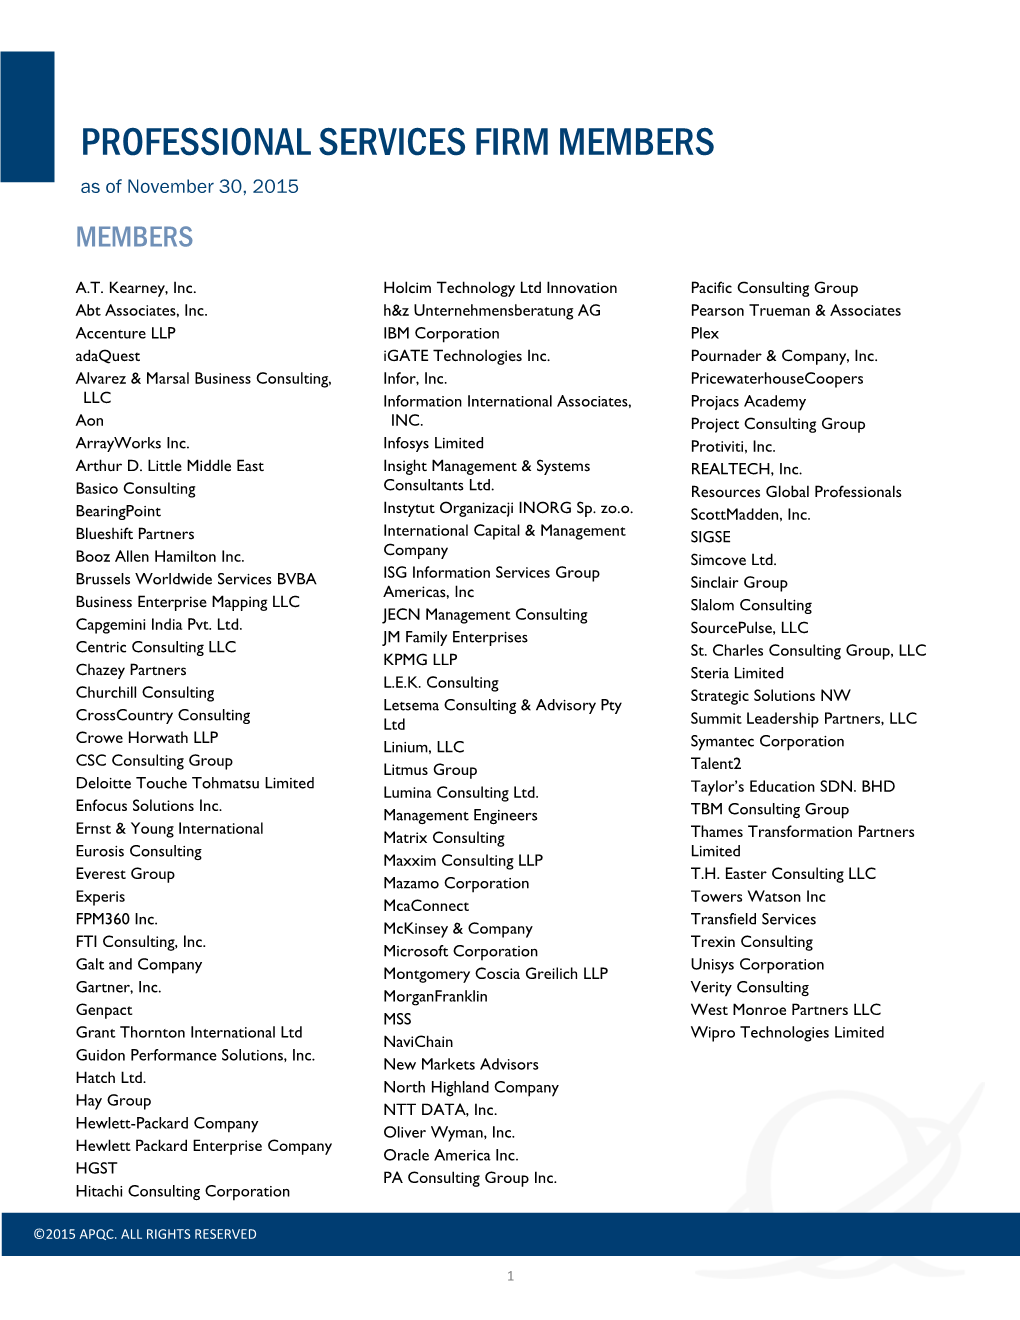 PROFESSIONAL SERVICES FIRM MEMBERS As of November 30, 2015 MEMBERS